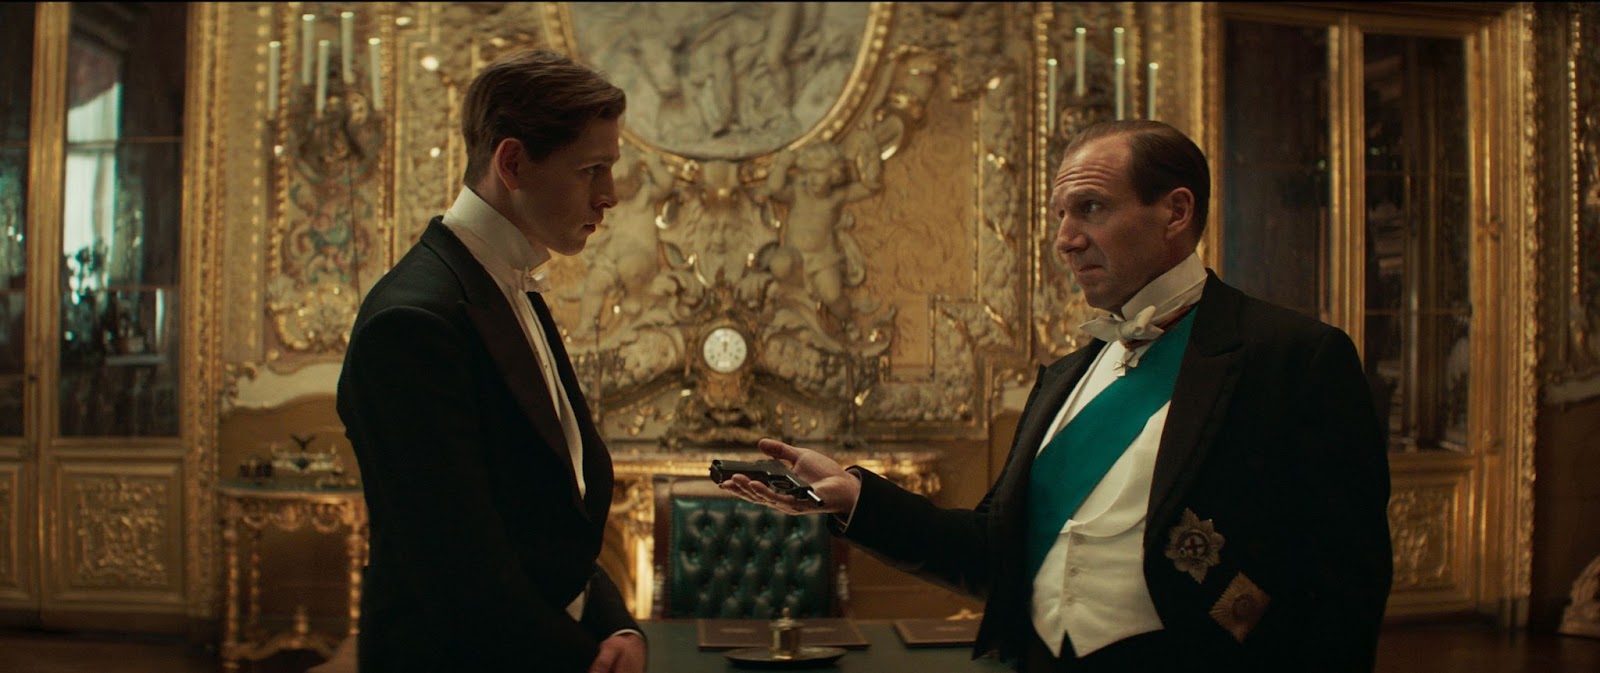 (L-R)_ Conrad (Harris Dickinson) and Oxford (Ralph Fiennes) in THE KING'S MAN. © 2019 Twentieth Century Fox Film Corporation. All rights reserved.